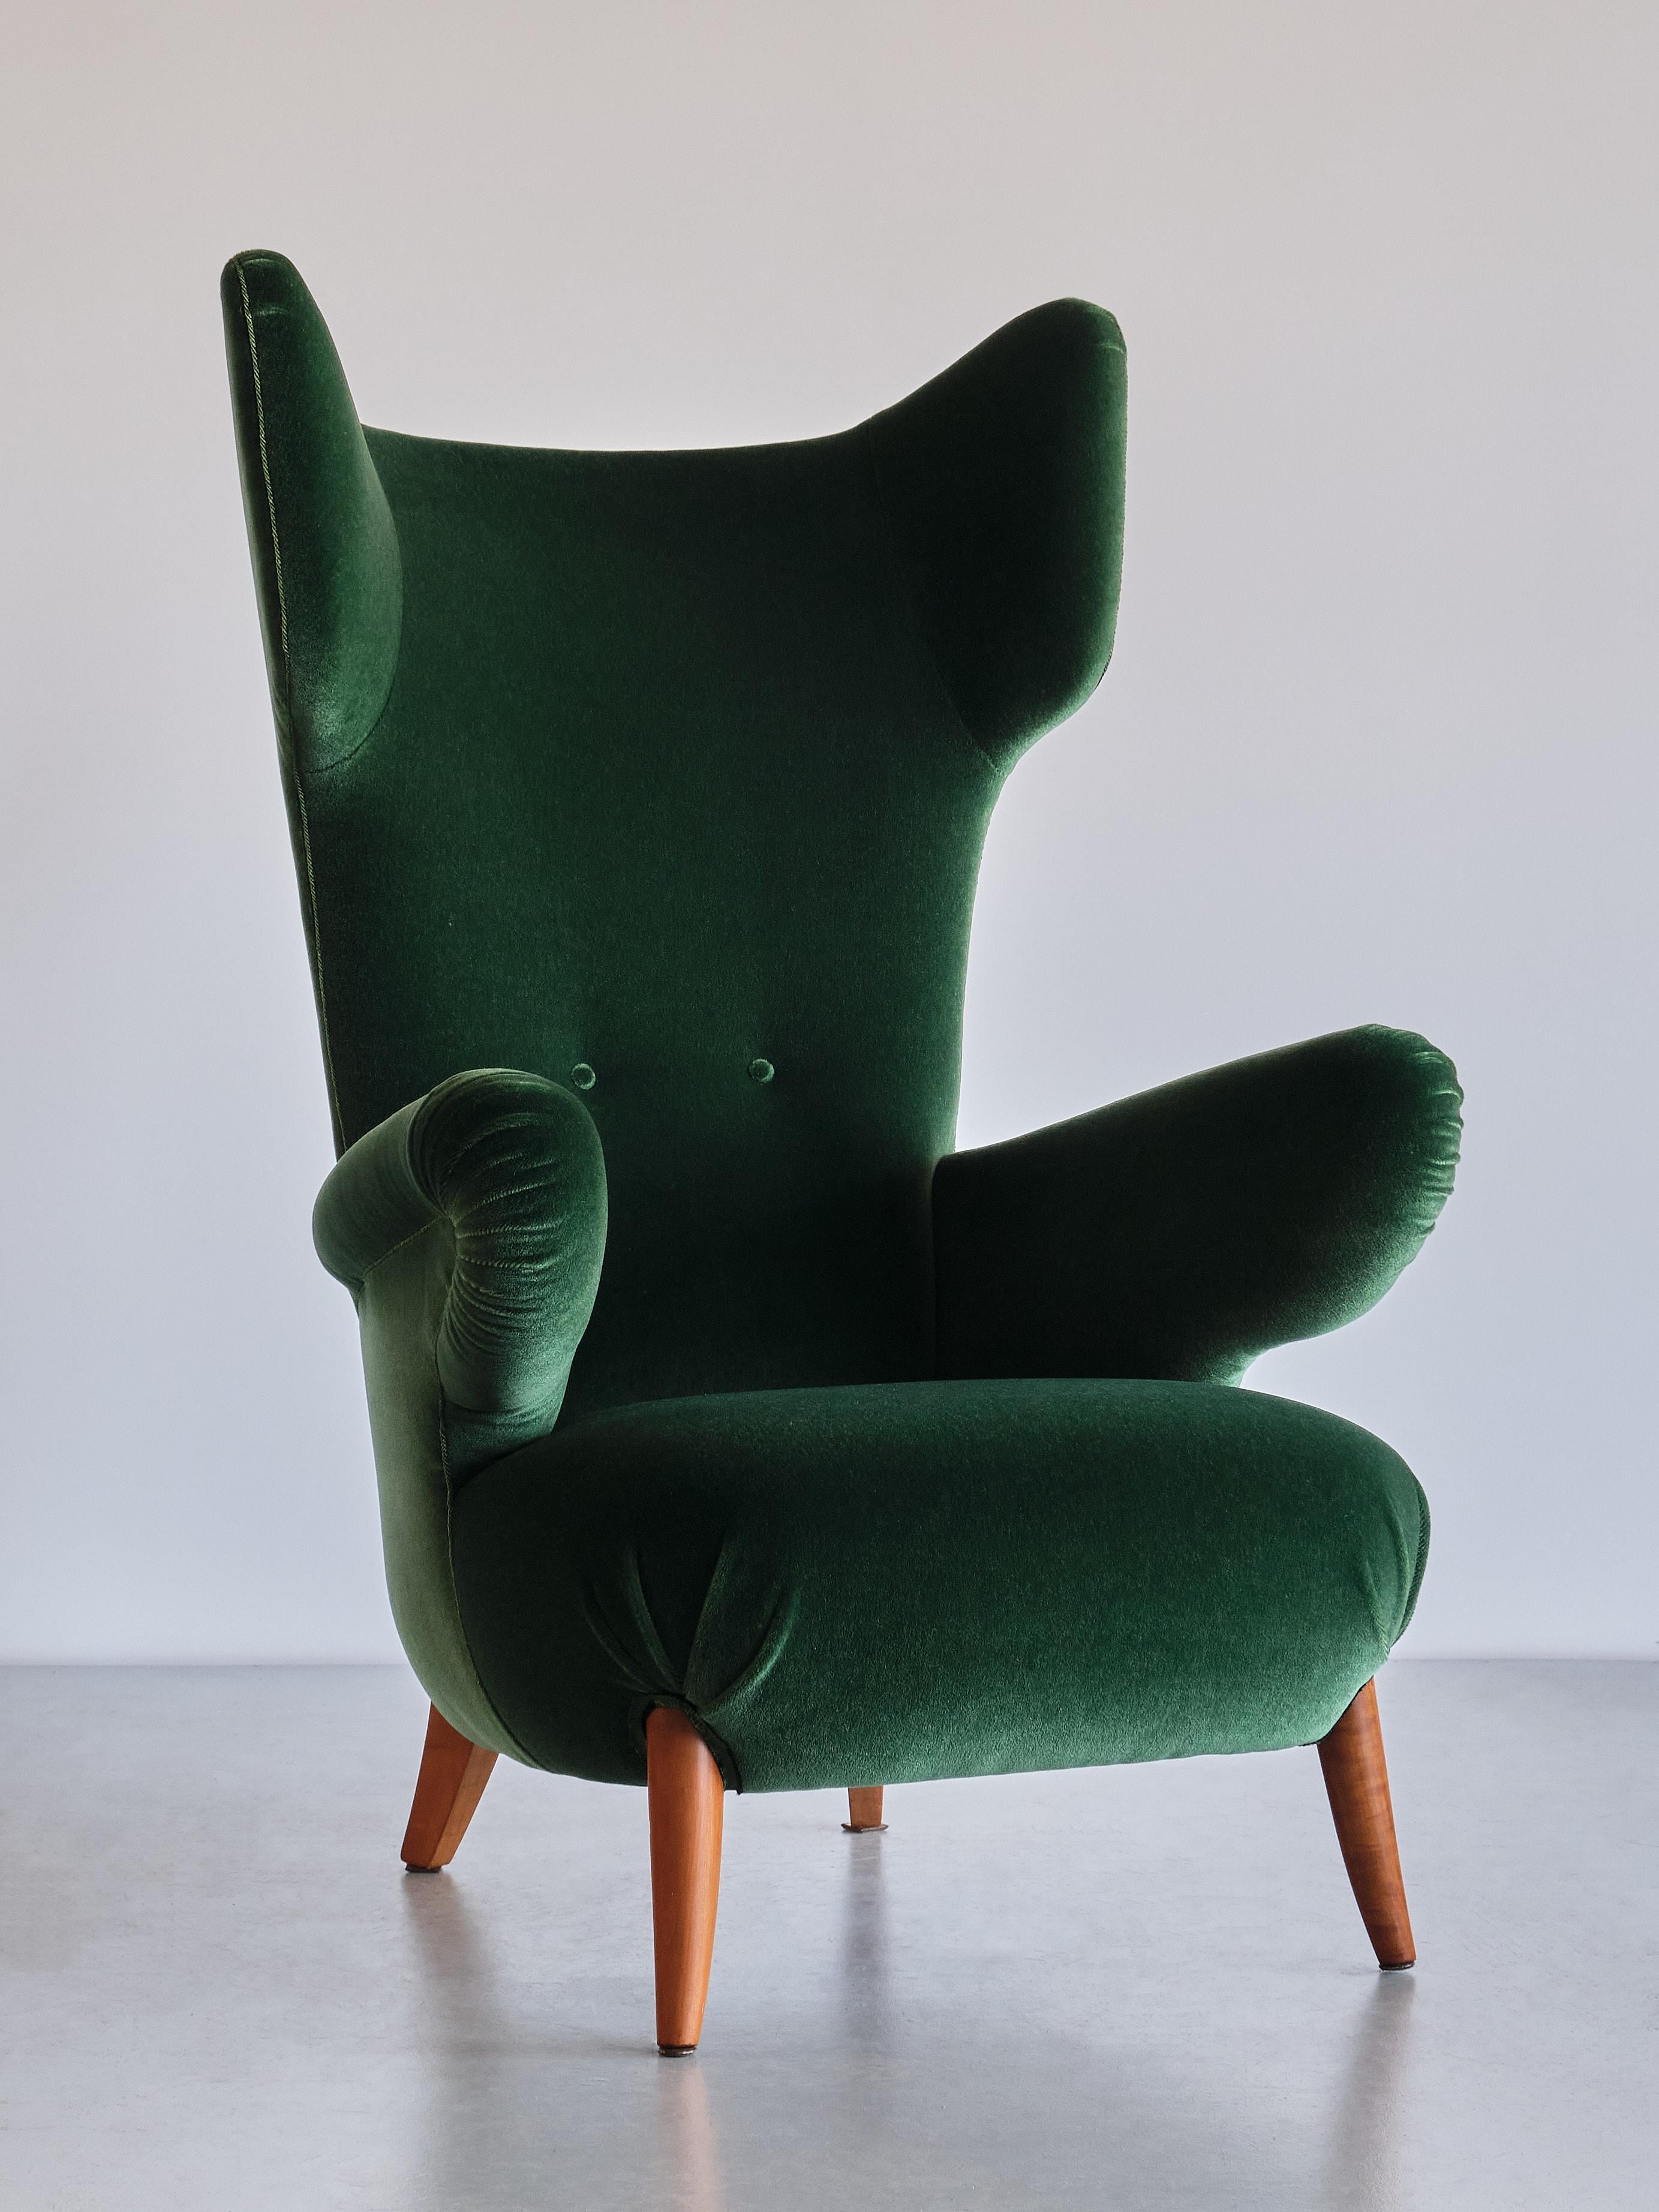 Important Ottorino Aloisio Wingback Chair in Green Mohair, Colli, Italy, 1957 For Sale 5